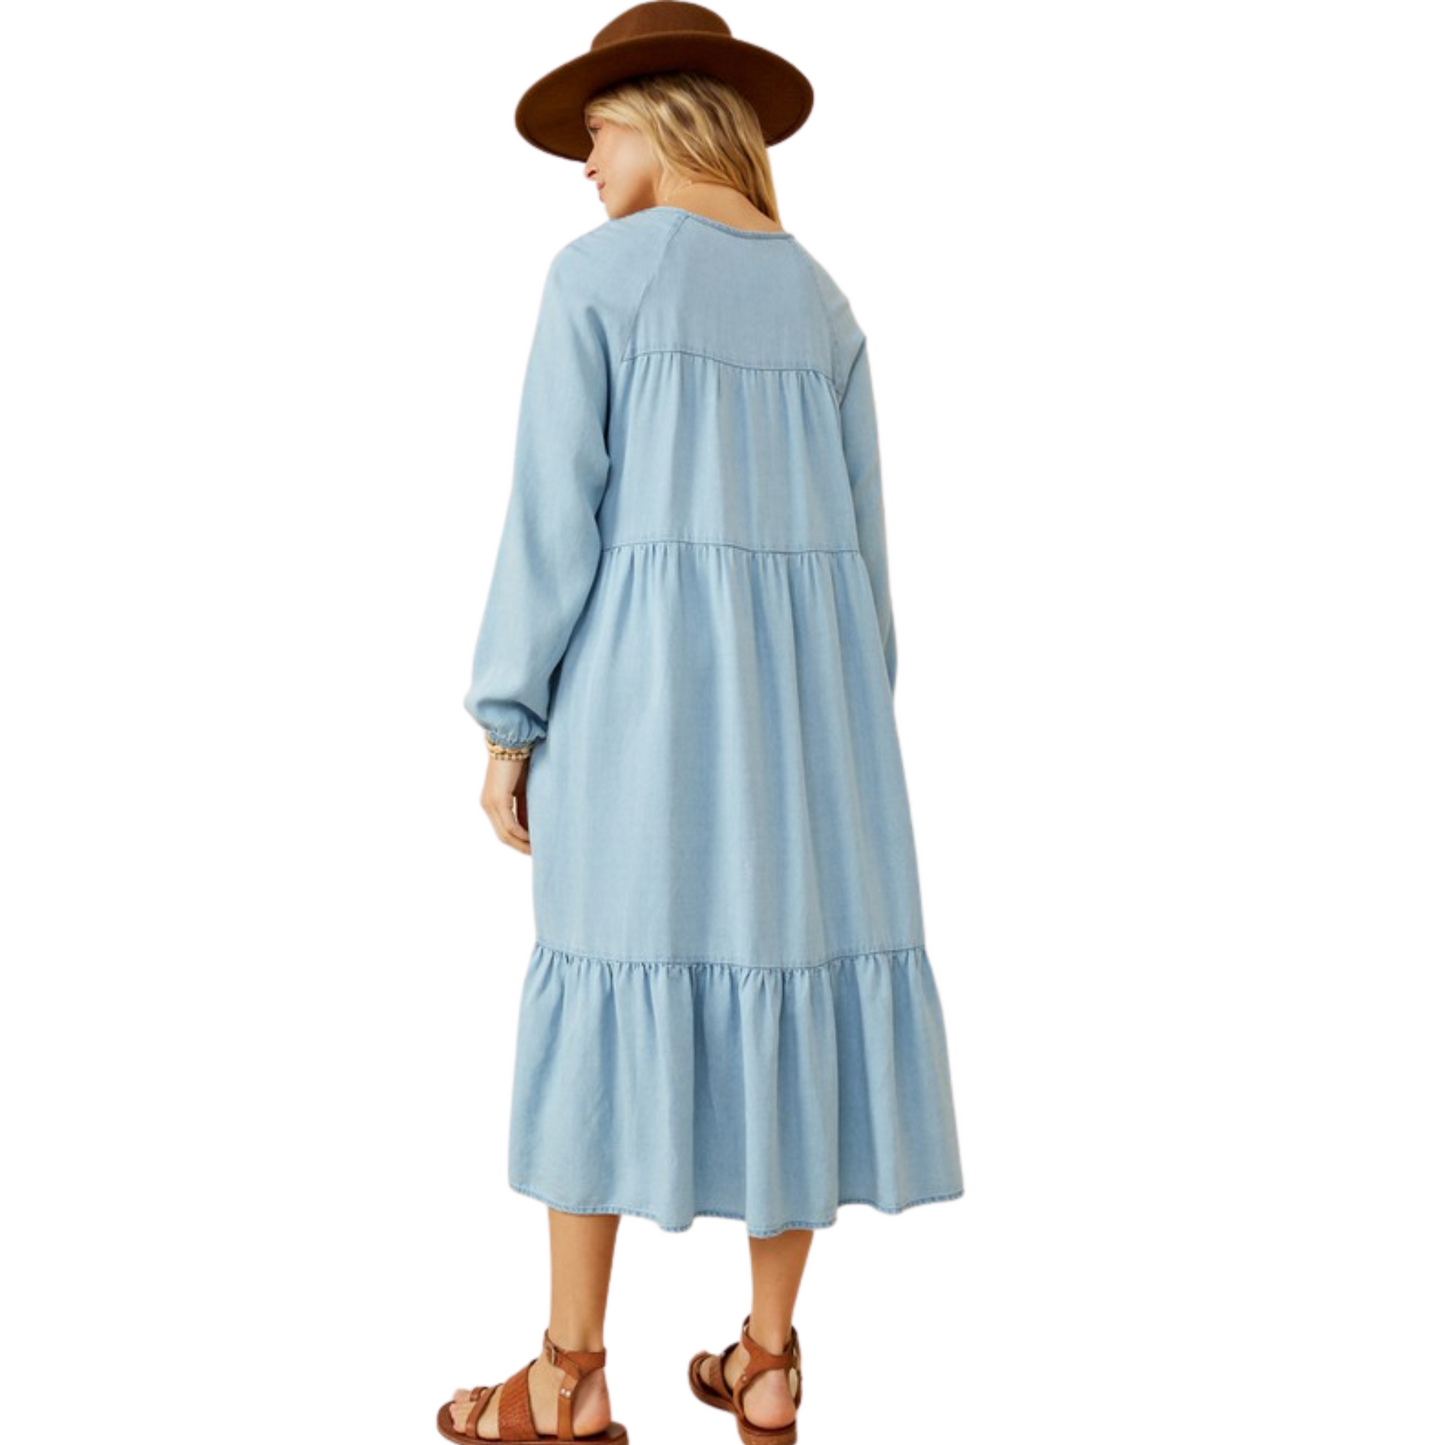 This Long Sleeve Tencel Dress offers contemporary style with a timeless denim fabrication. The womens smock detail ties at the neck and provides a sophisticated silhouette, while side pockets complete the design. Crafted from 100% Tencel, this dark denim dress is the perfect balance of modern and classic.